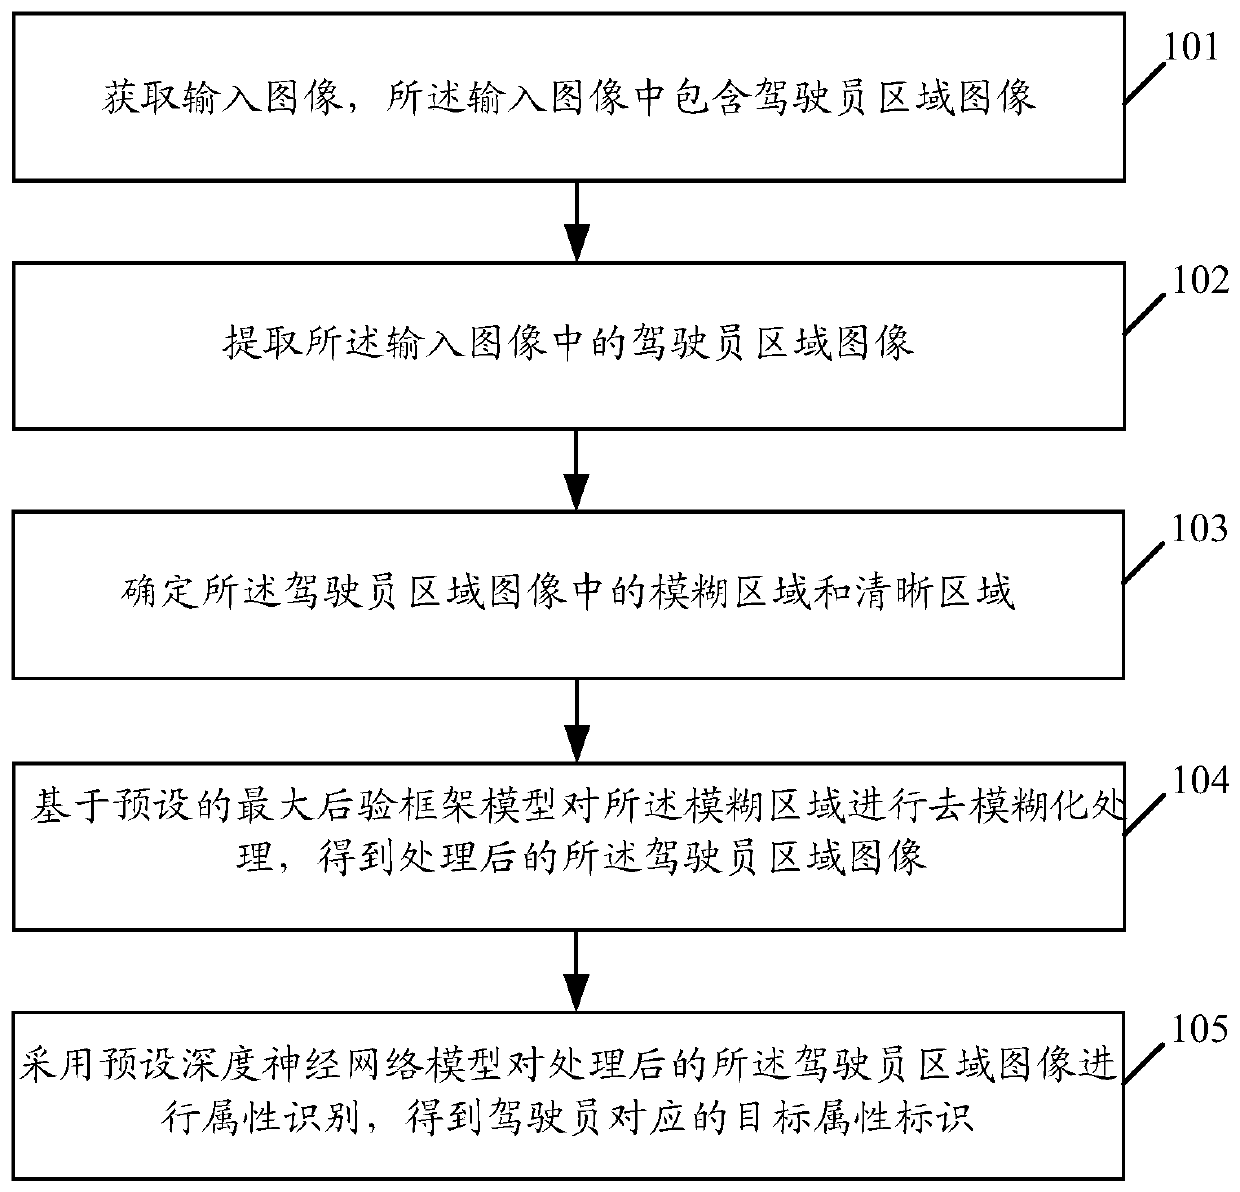 Driver attribute identification method and related products